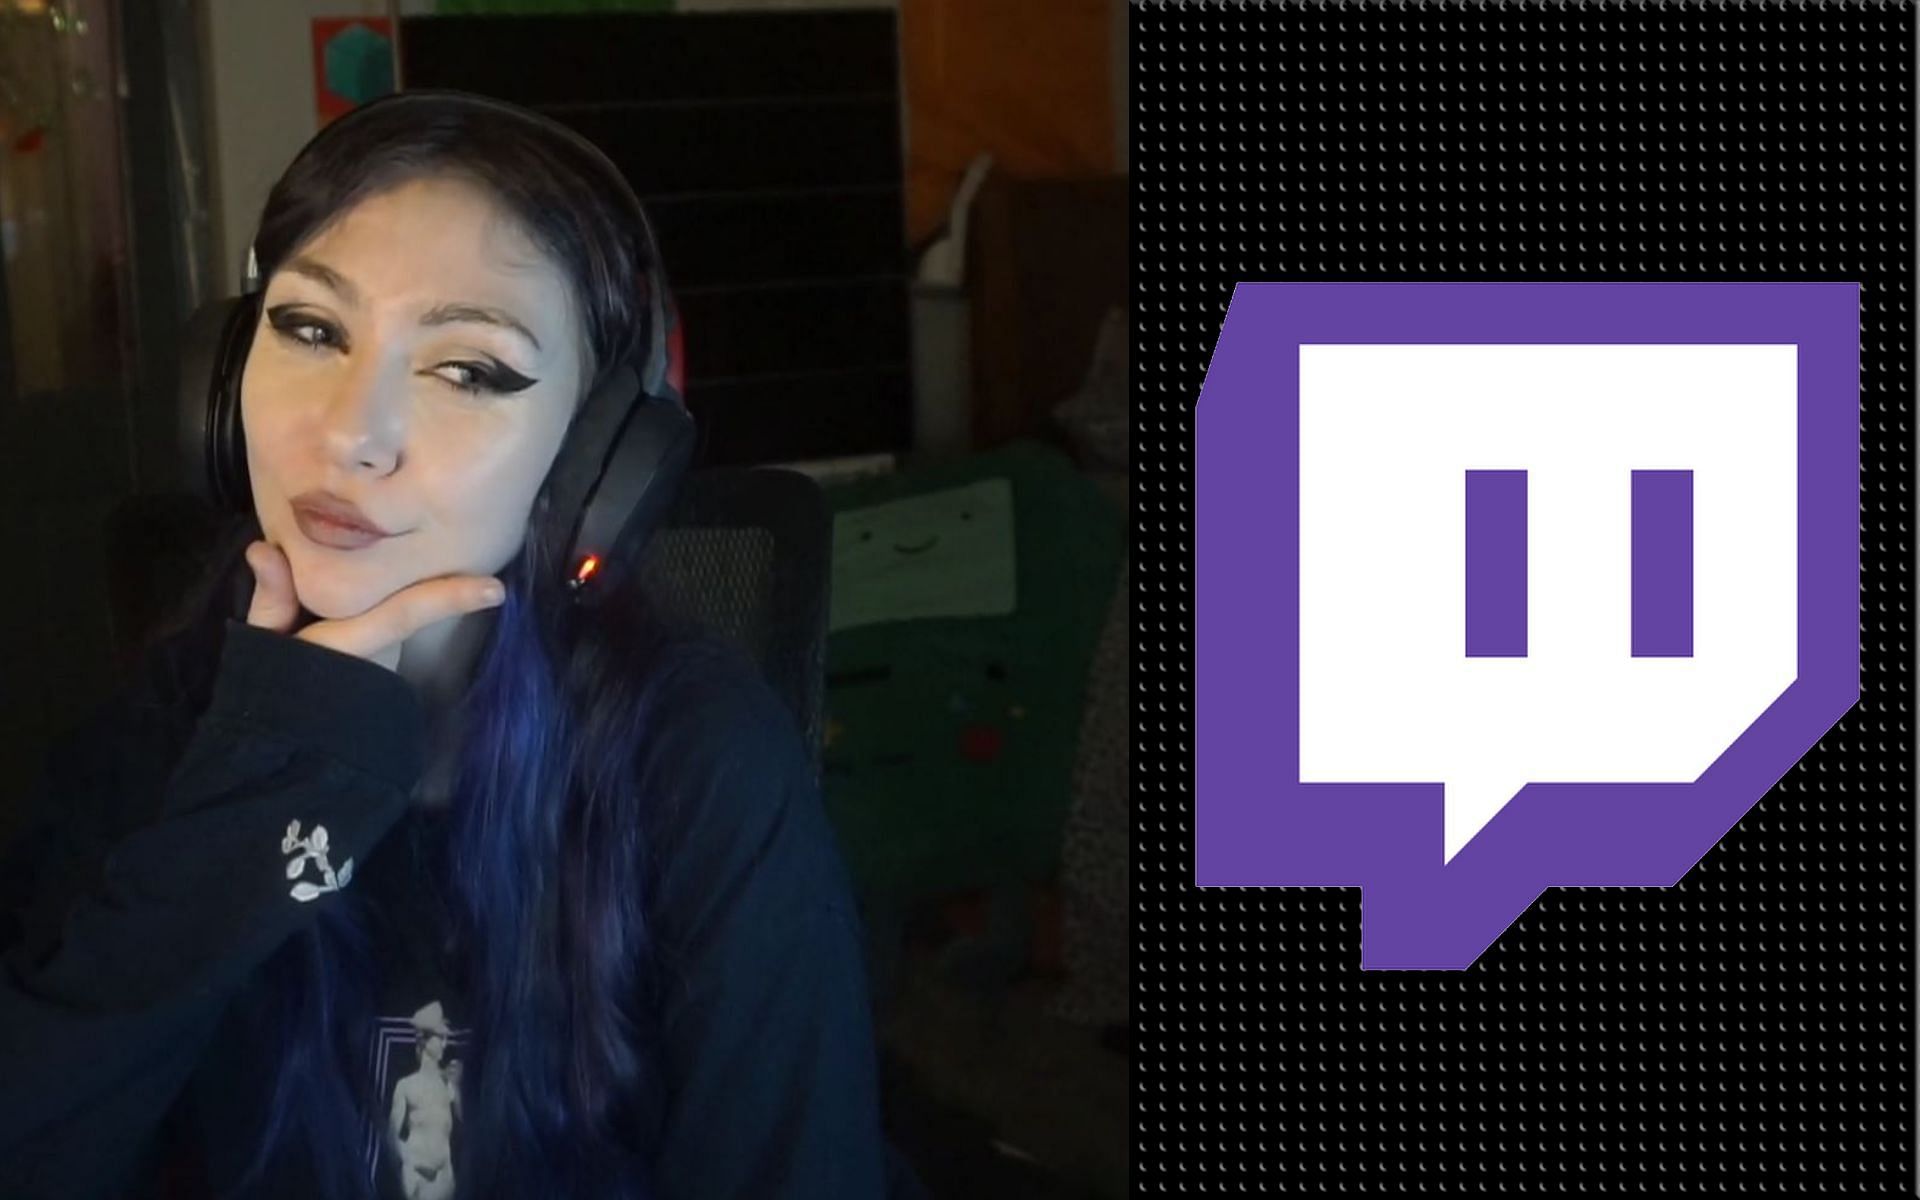 JustAMinx becomes third Twitch streamer to be banned for saying the same  “derogatory slur”